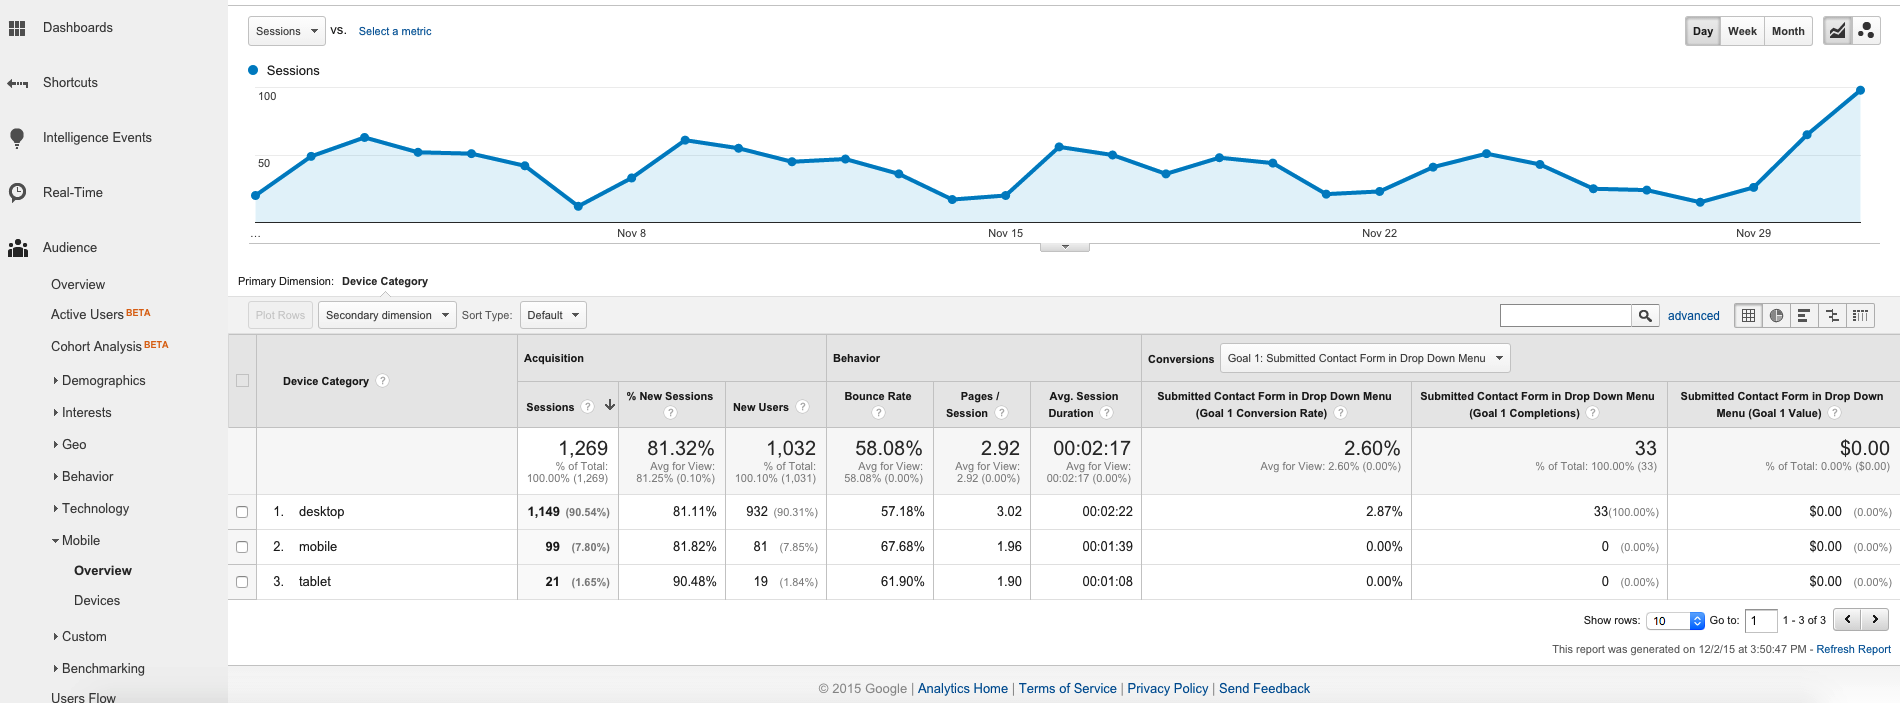 Device traffic from Desktop, Mobile, and Tablet shown in Google Analytics